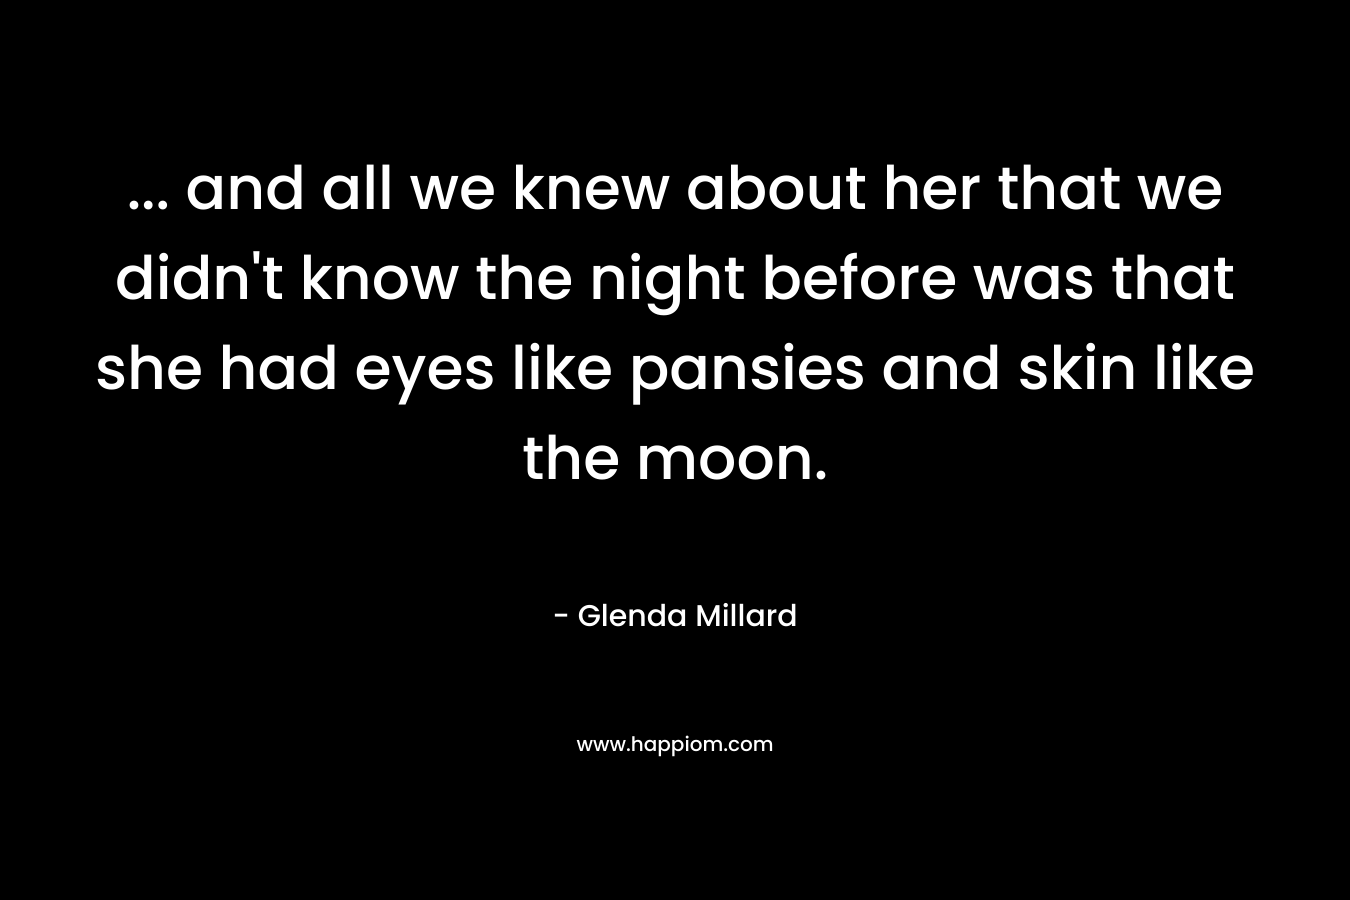 … and all we knew about her that we didn’t know the night before was that she had eyes like pansies and skin like the moon. – Glenda Millard